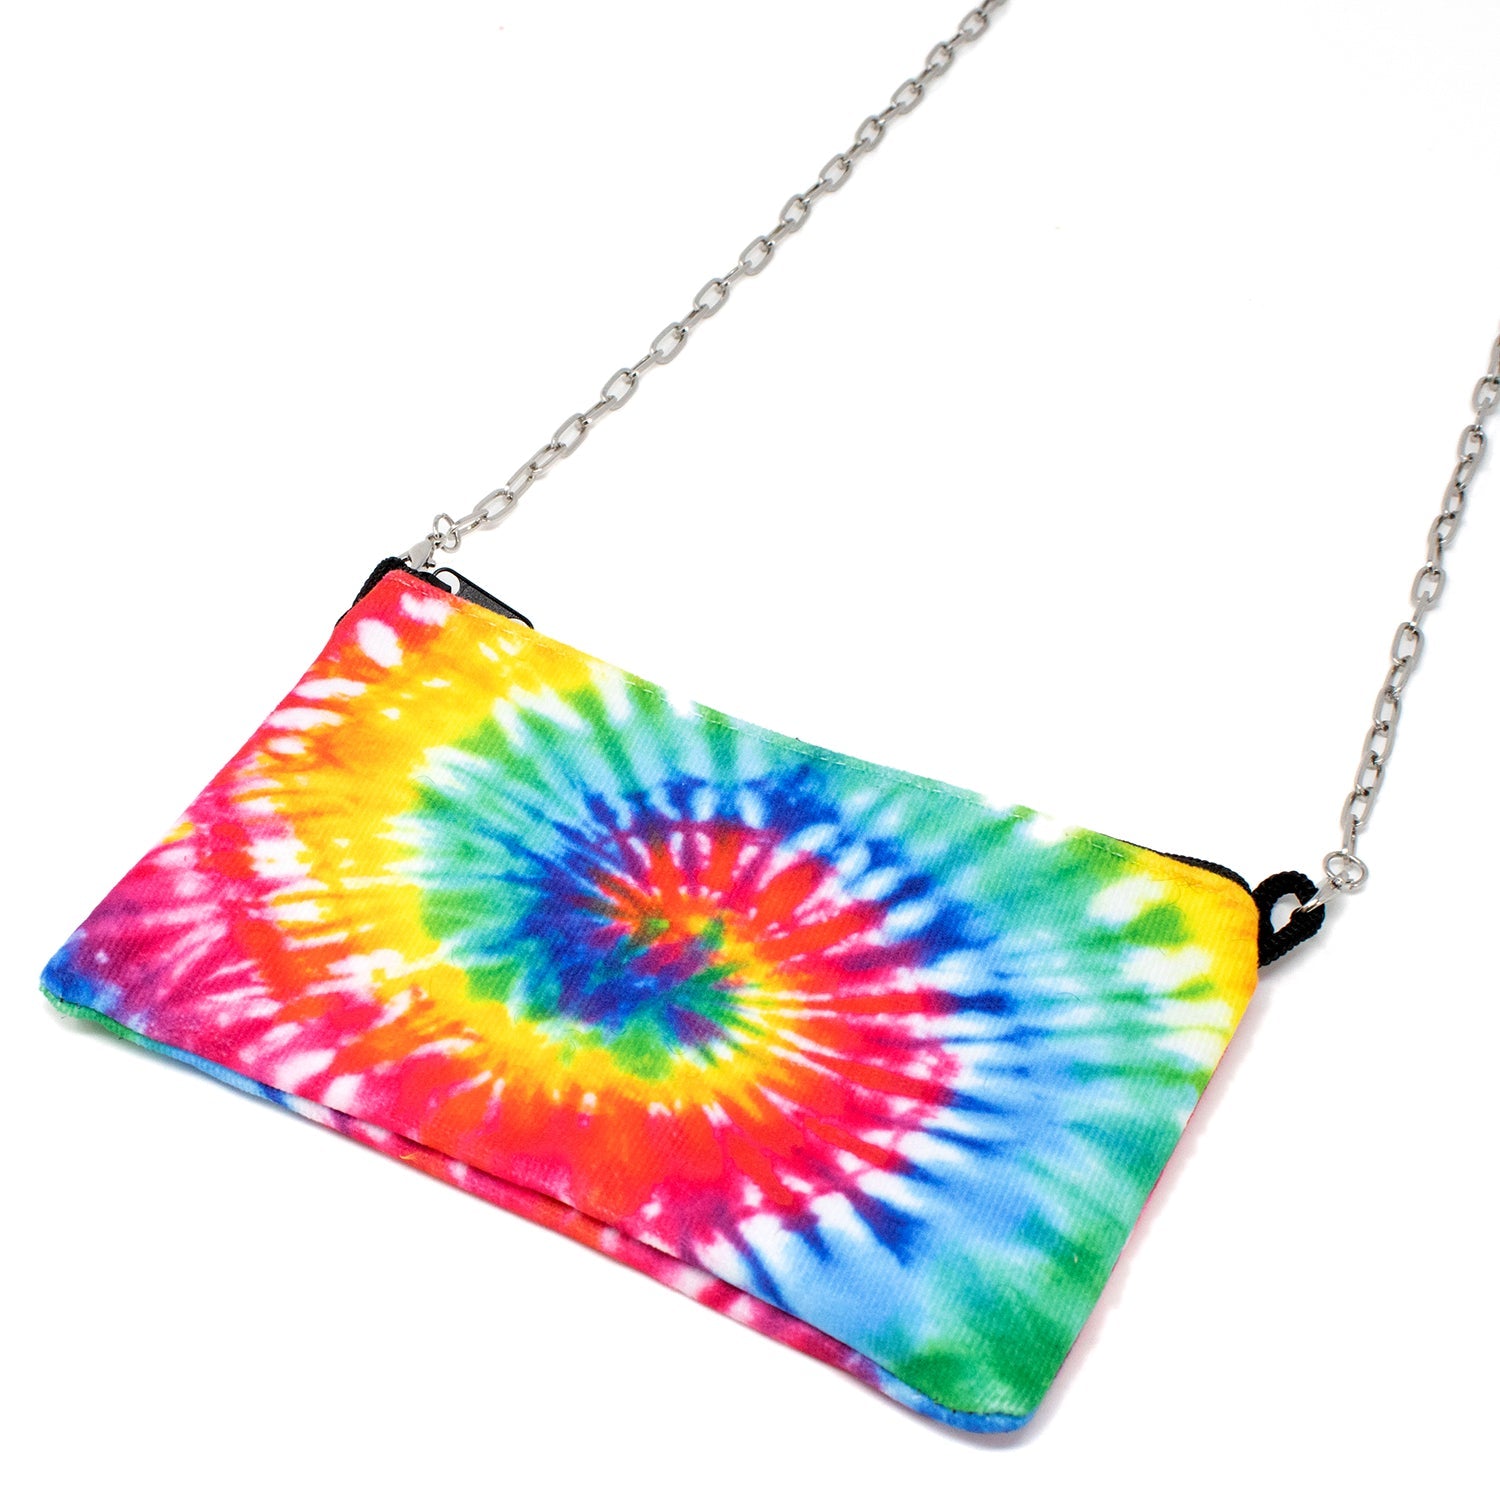 Mask Pouch and Lanyards holds your mask in a safe, enclosed pouch you can easily hang around your neck. Great for work, home, jogging, cleaning - any place you need your mask out of they way. Tie-dye pouch with silver chain.